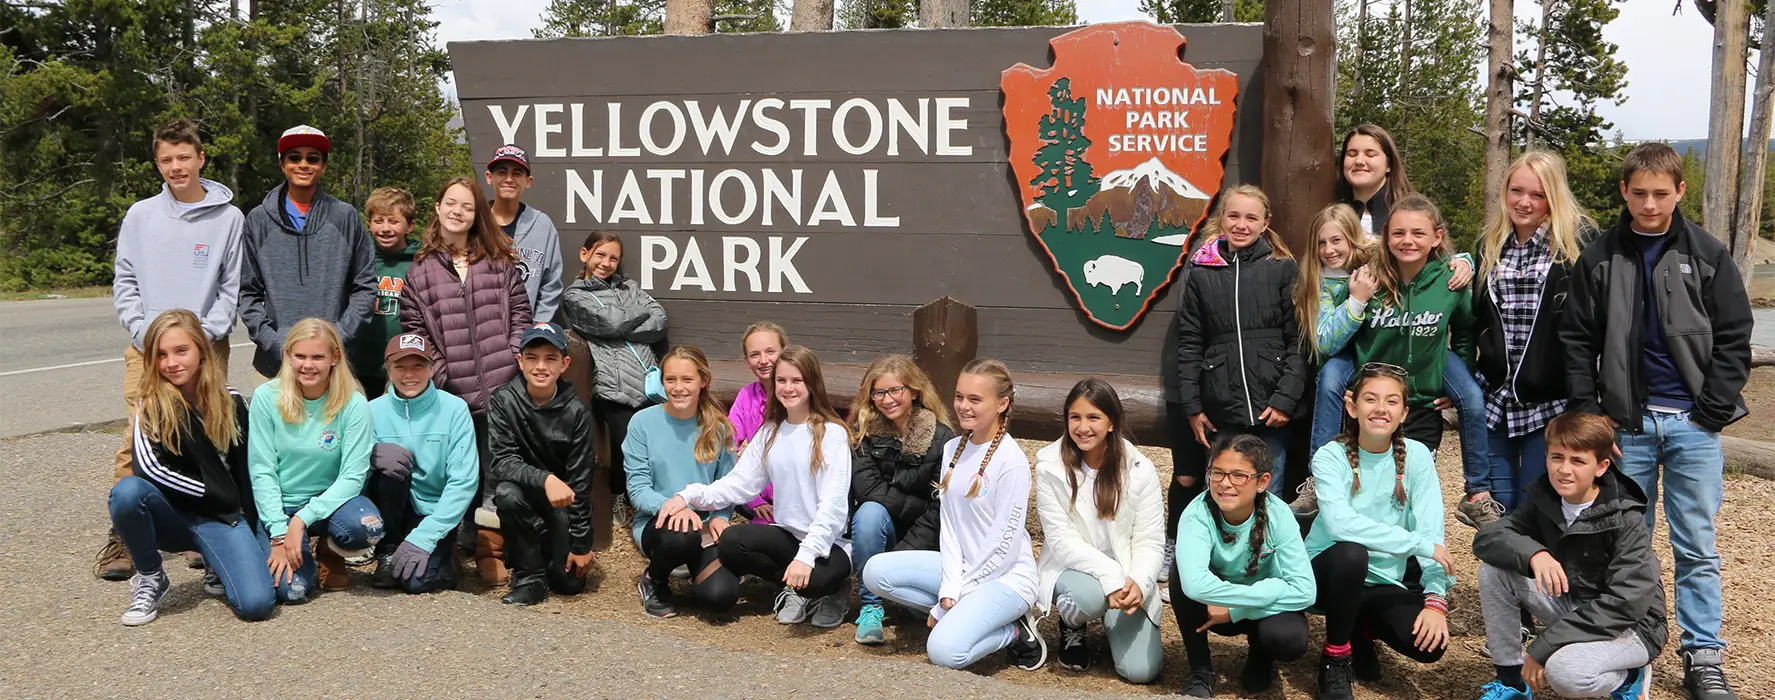 A student group poses in front of the Yellowstone National Park sign.